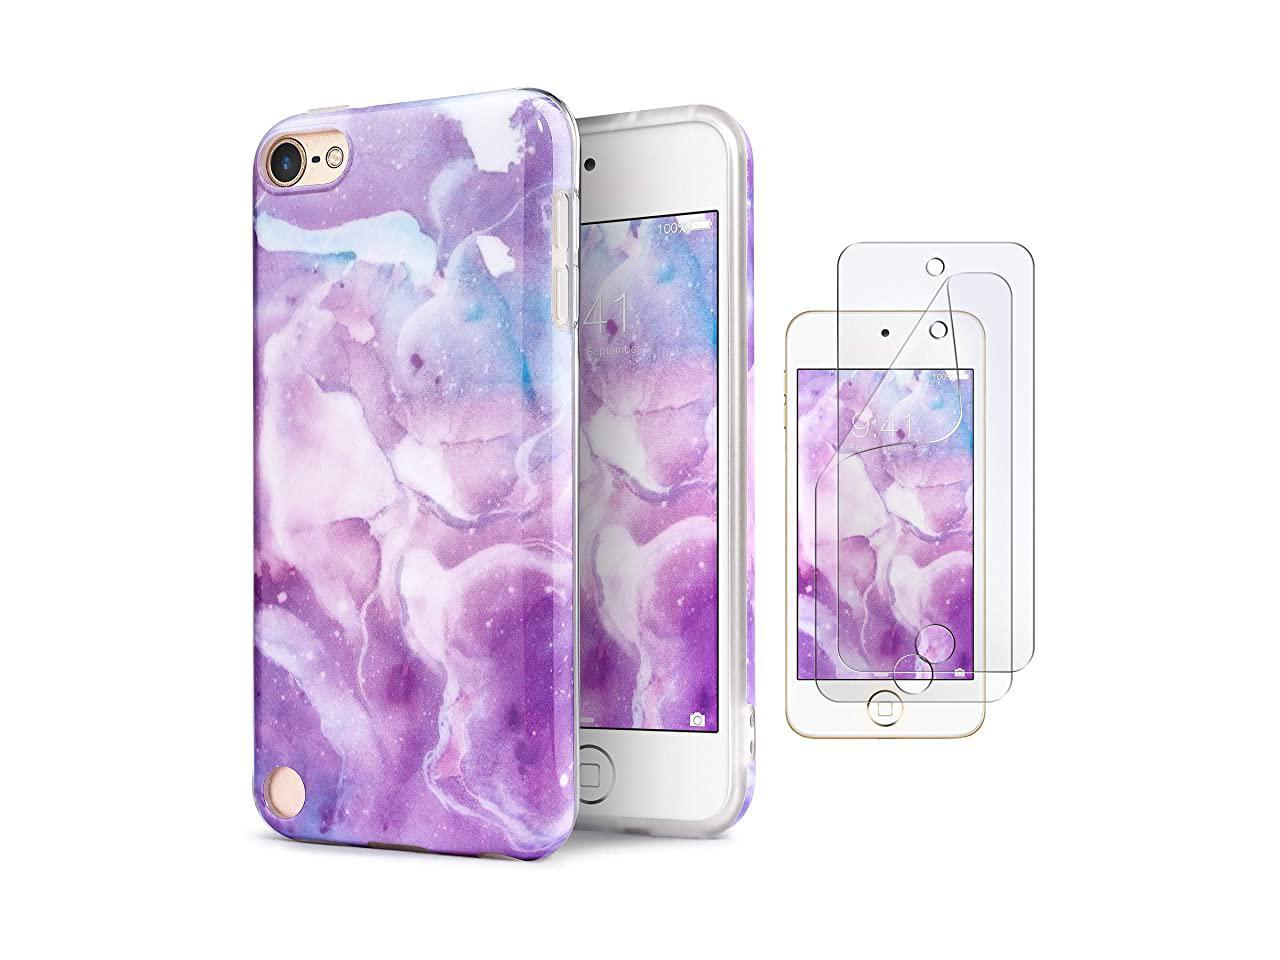 Diamond for iPod Touch 5/6 Marble Case and Screen Protector,Unique Pattern Design Ultra Thin Slim Fit Soft Silicone Phone Case Bumper,QFFUN Shockproof Anti-Scratch Protective Back Cover